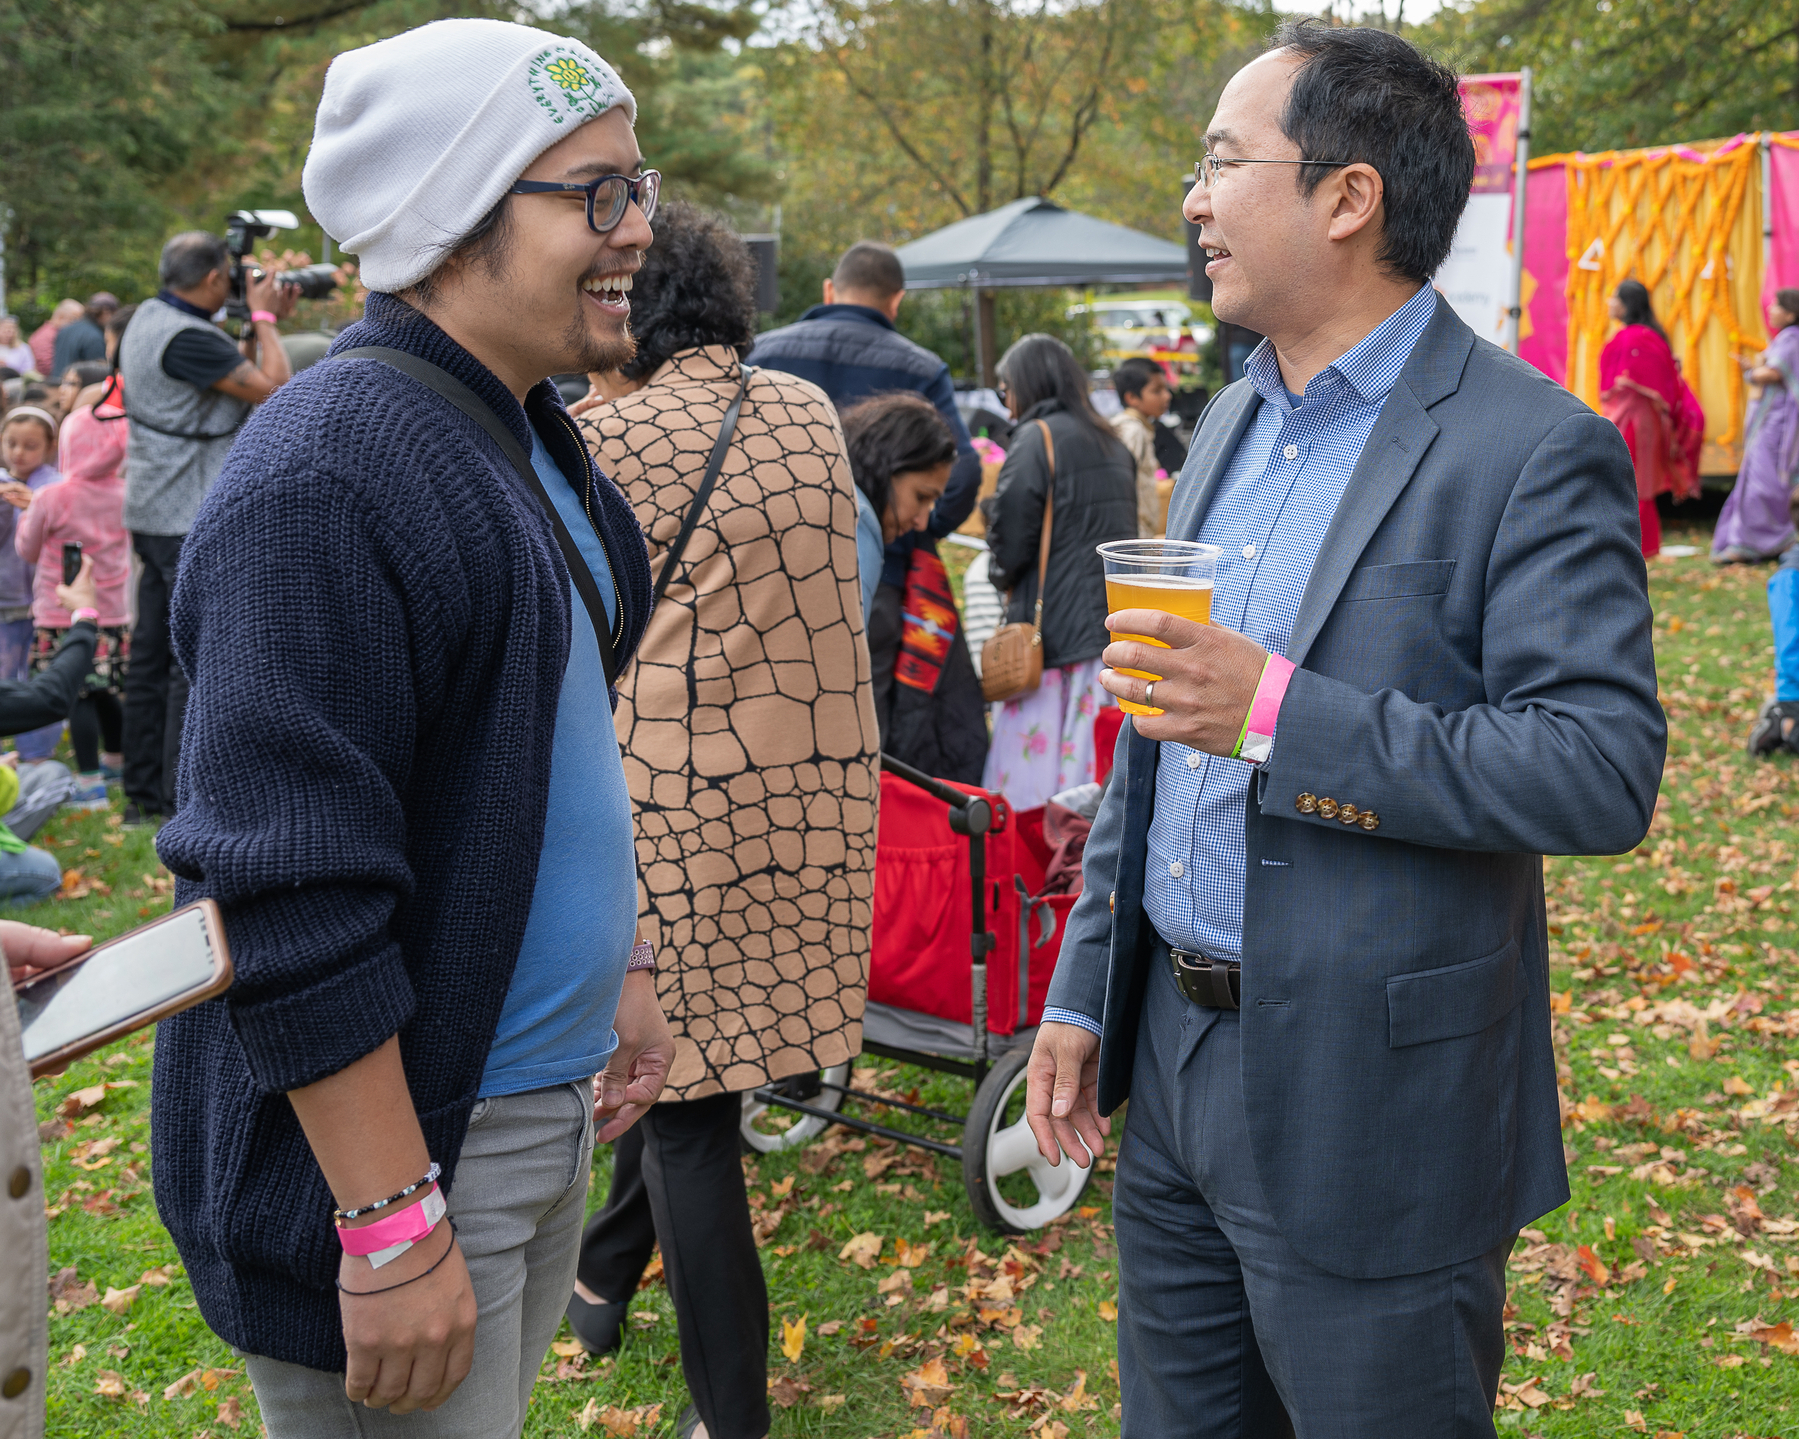 Miguel a masc Filipino man on the left talking with Andy Kim a congressman who is on the right. They are outdoors in the daytime in the fall. 